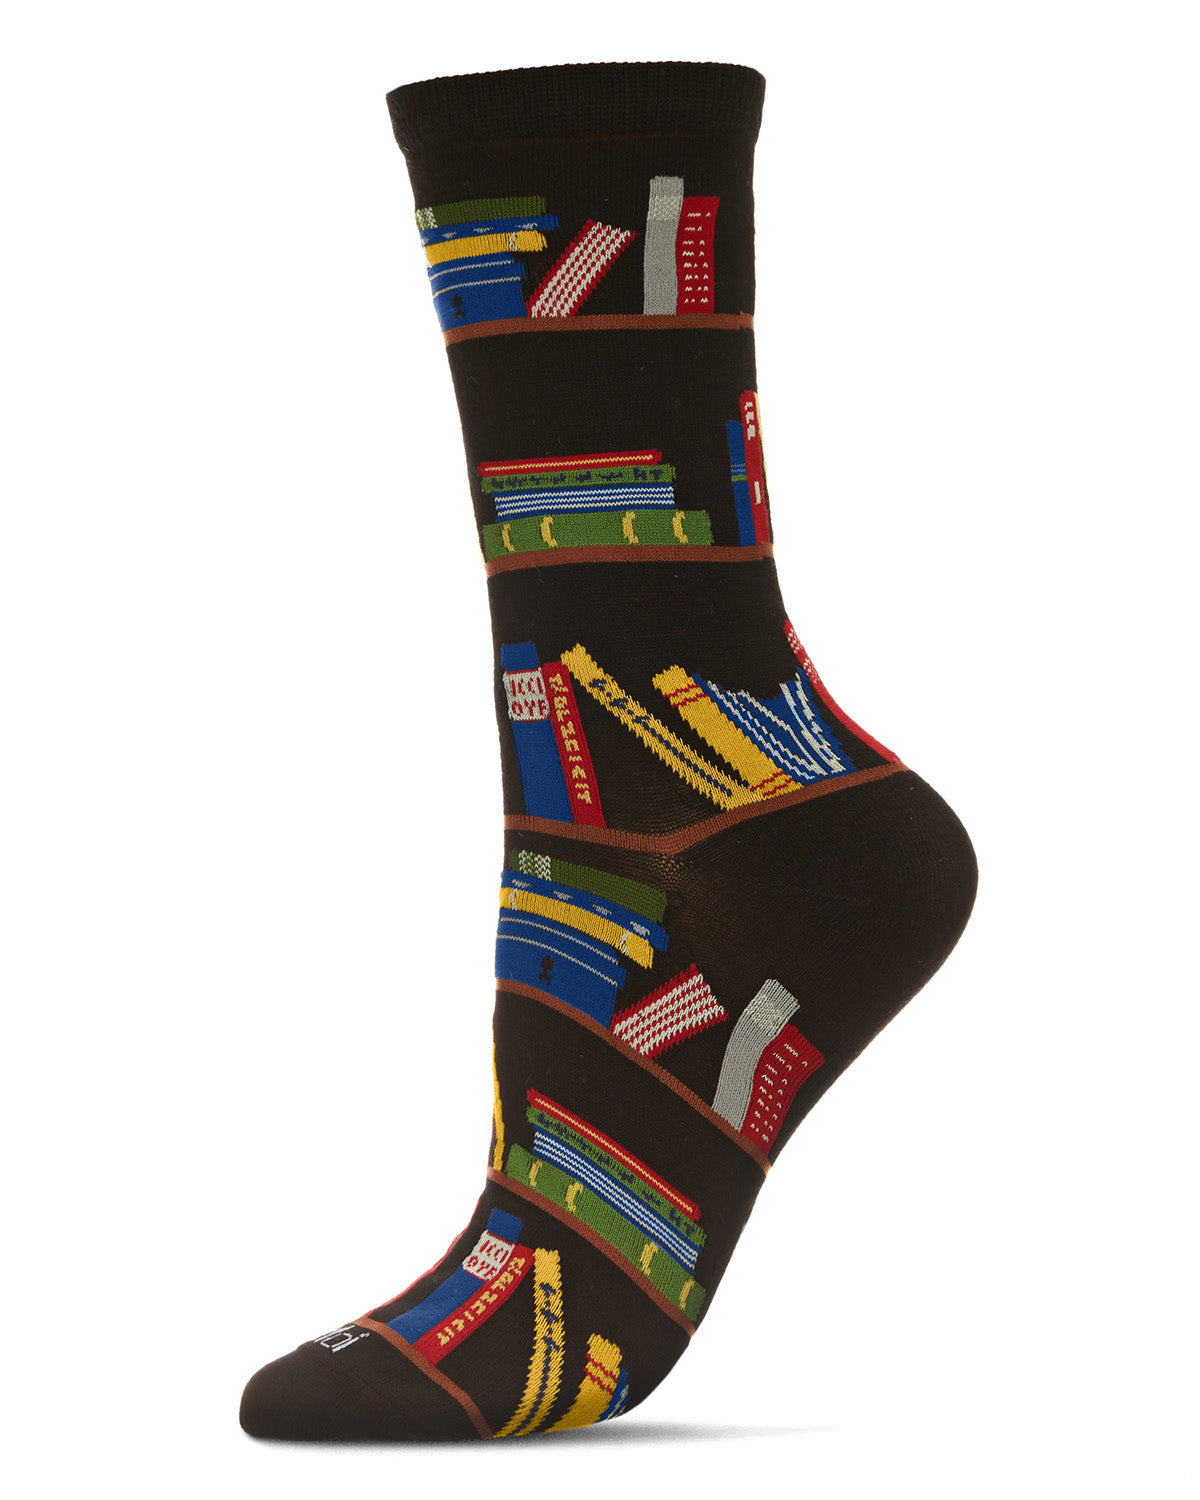 bamboo socks with books